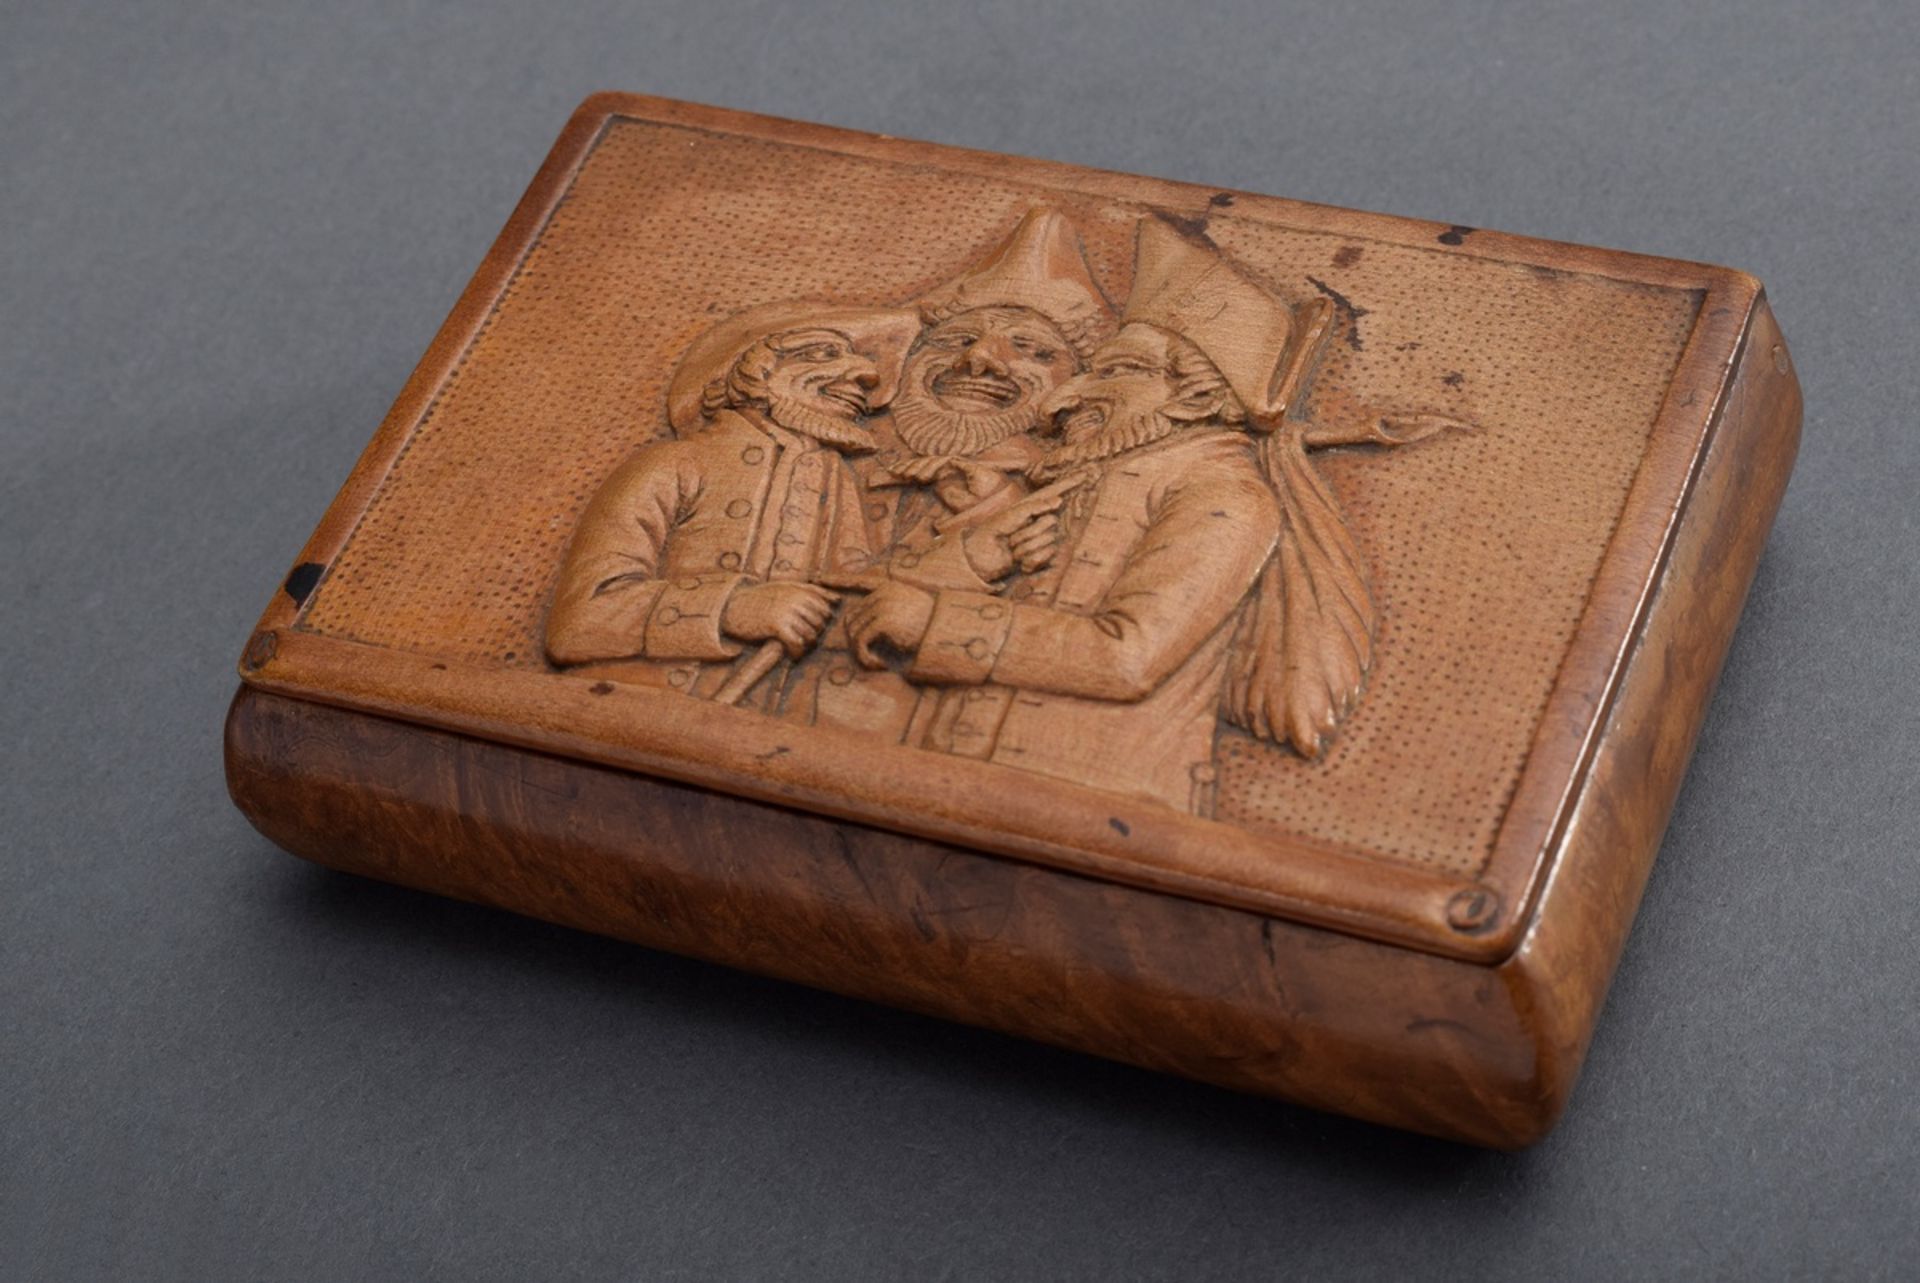 Wurzelholz Schnupftabakdose mit geschnitztem Rel | Burl wood snuff box with carved relief in the li - Image 7 of 8